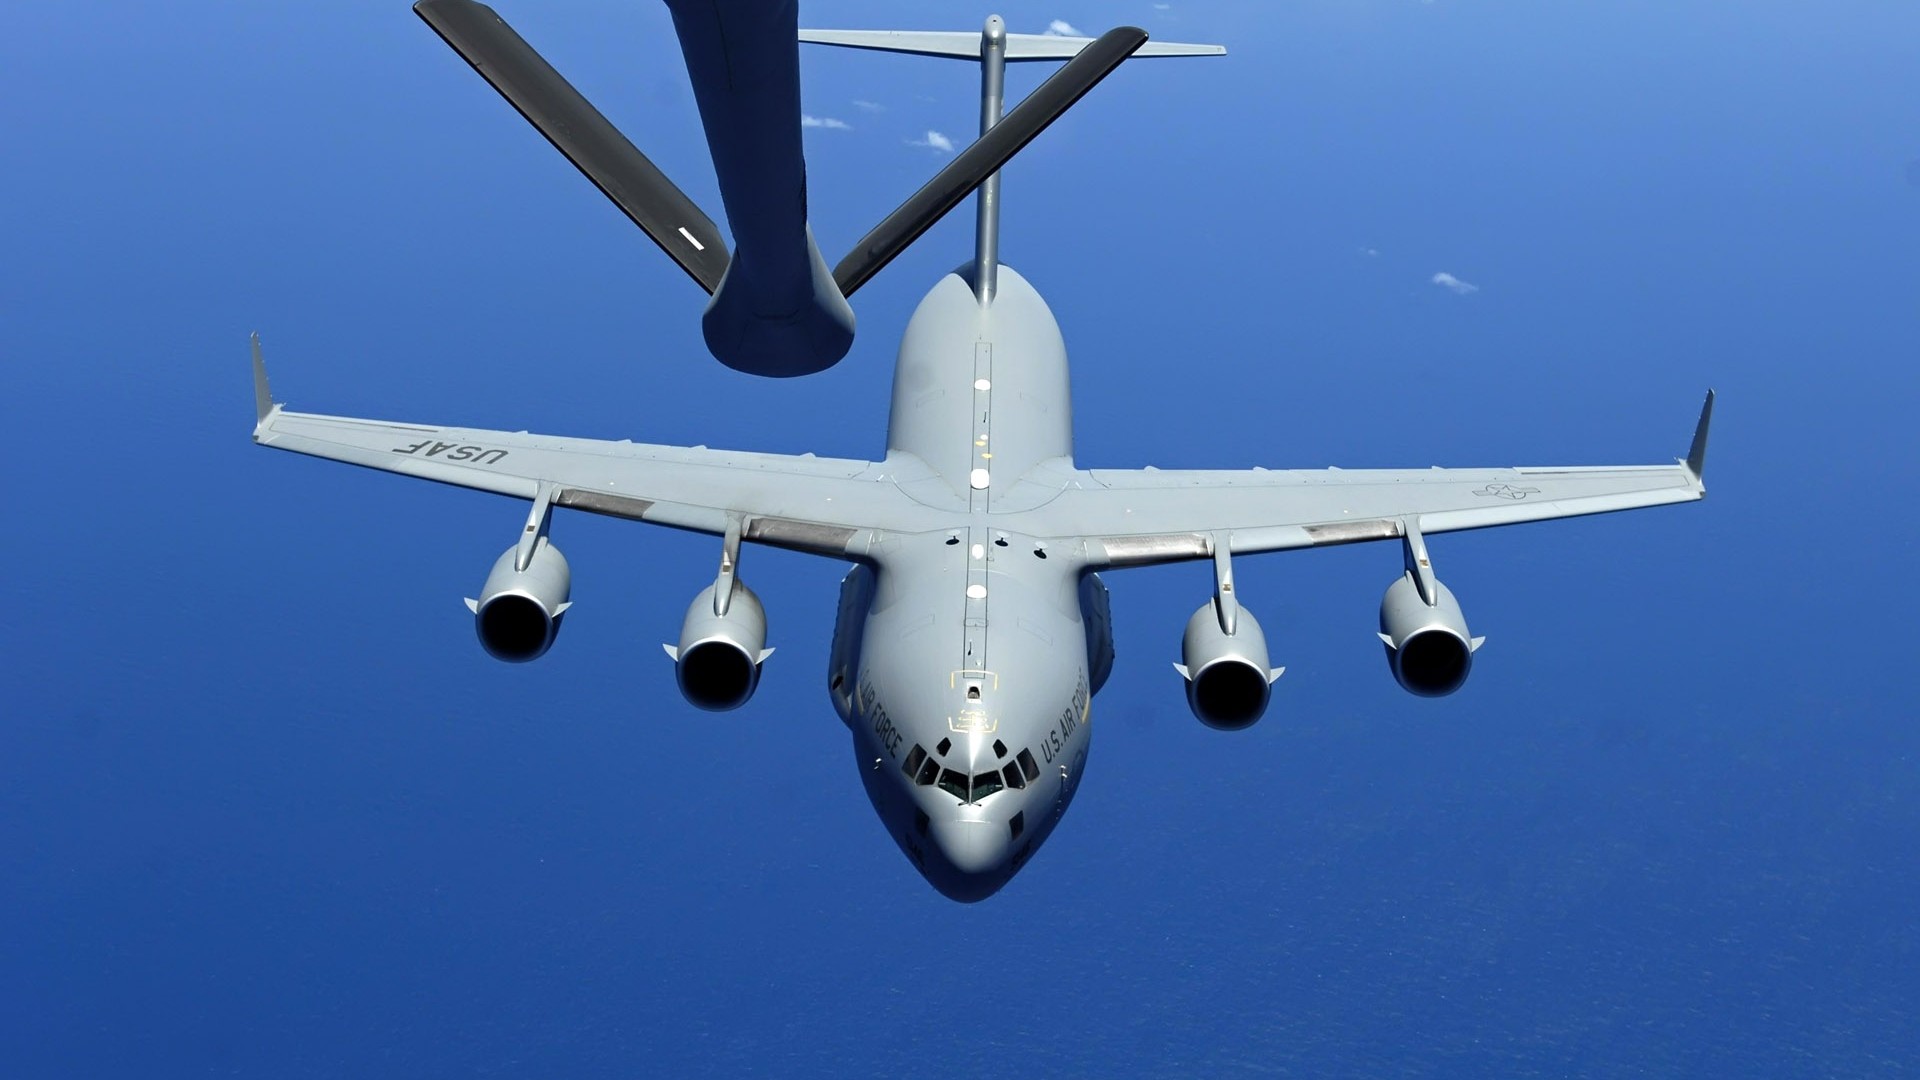 Military Aircraft Airplane Jets Sky Military Aircraft Mid Air Refueling 1920x1080